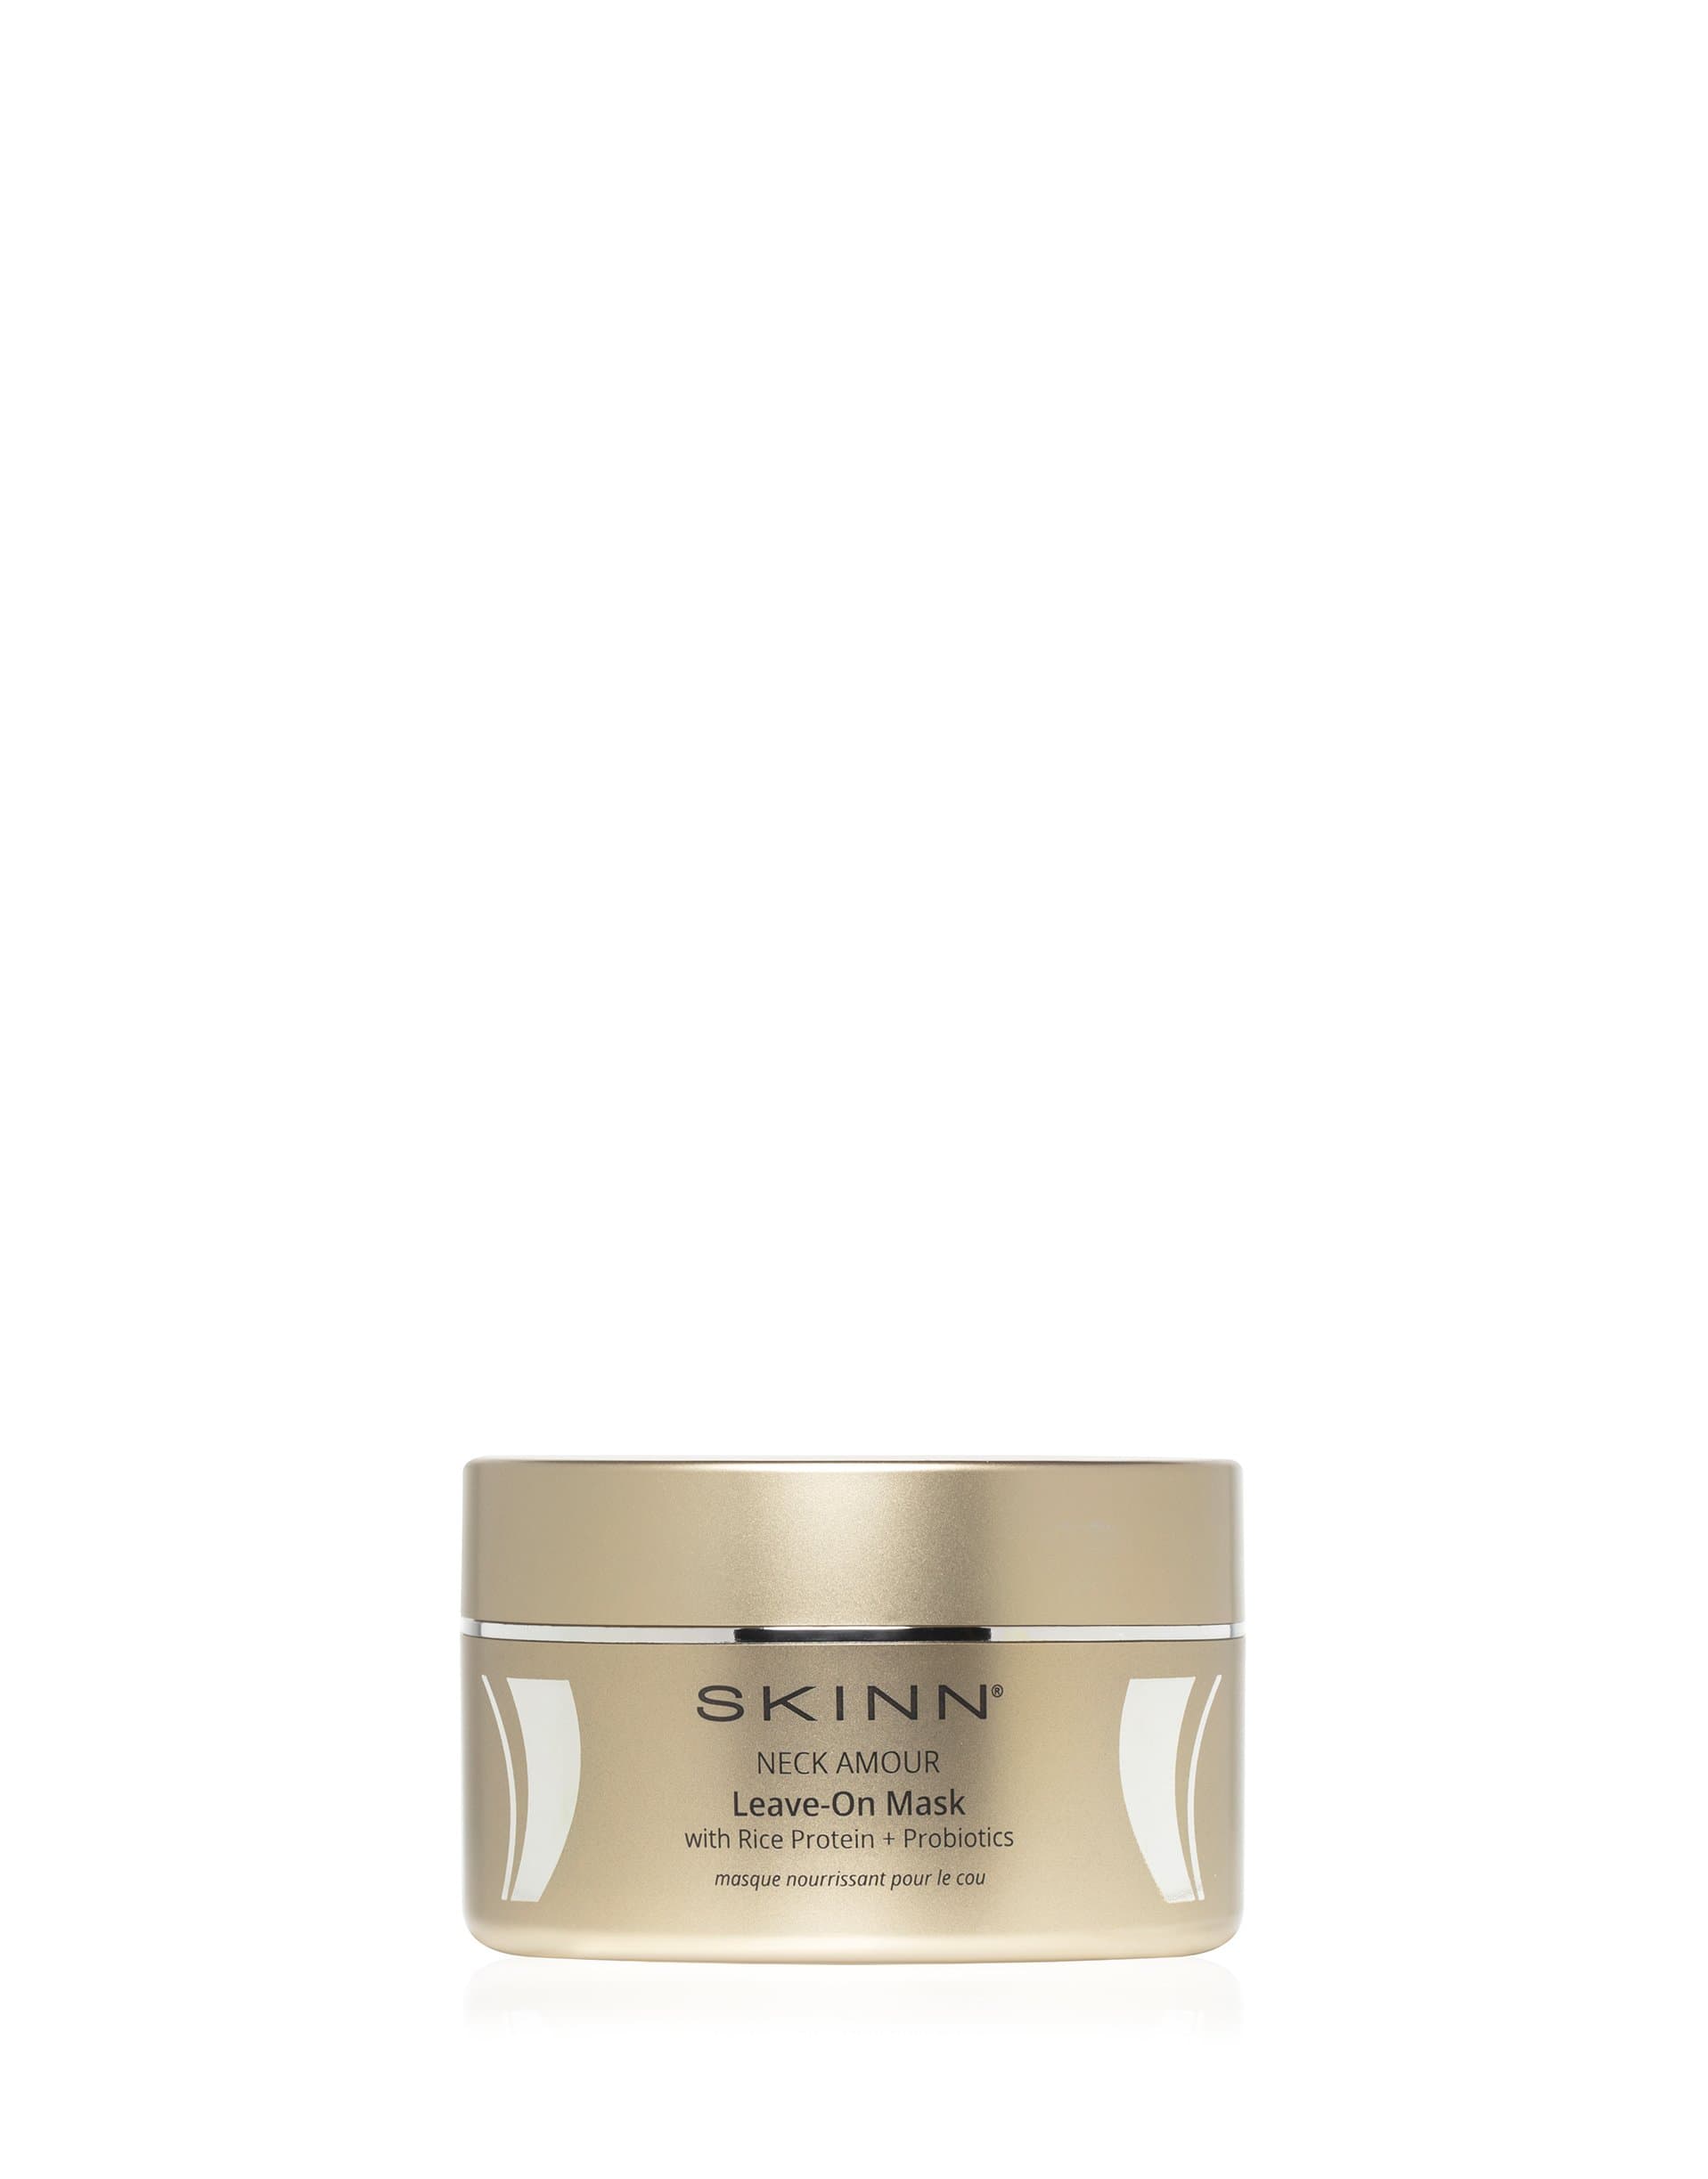 SKINN Rich Protein + Probiotic Leave-On Neck Mask